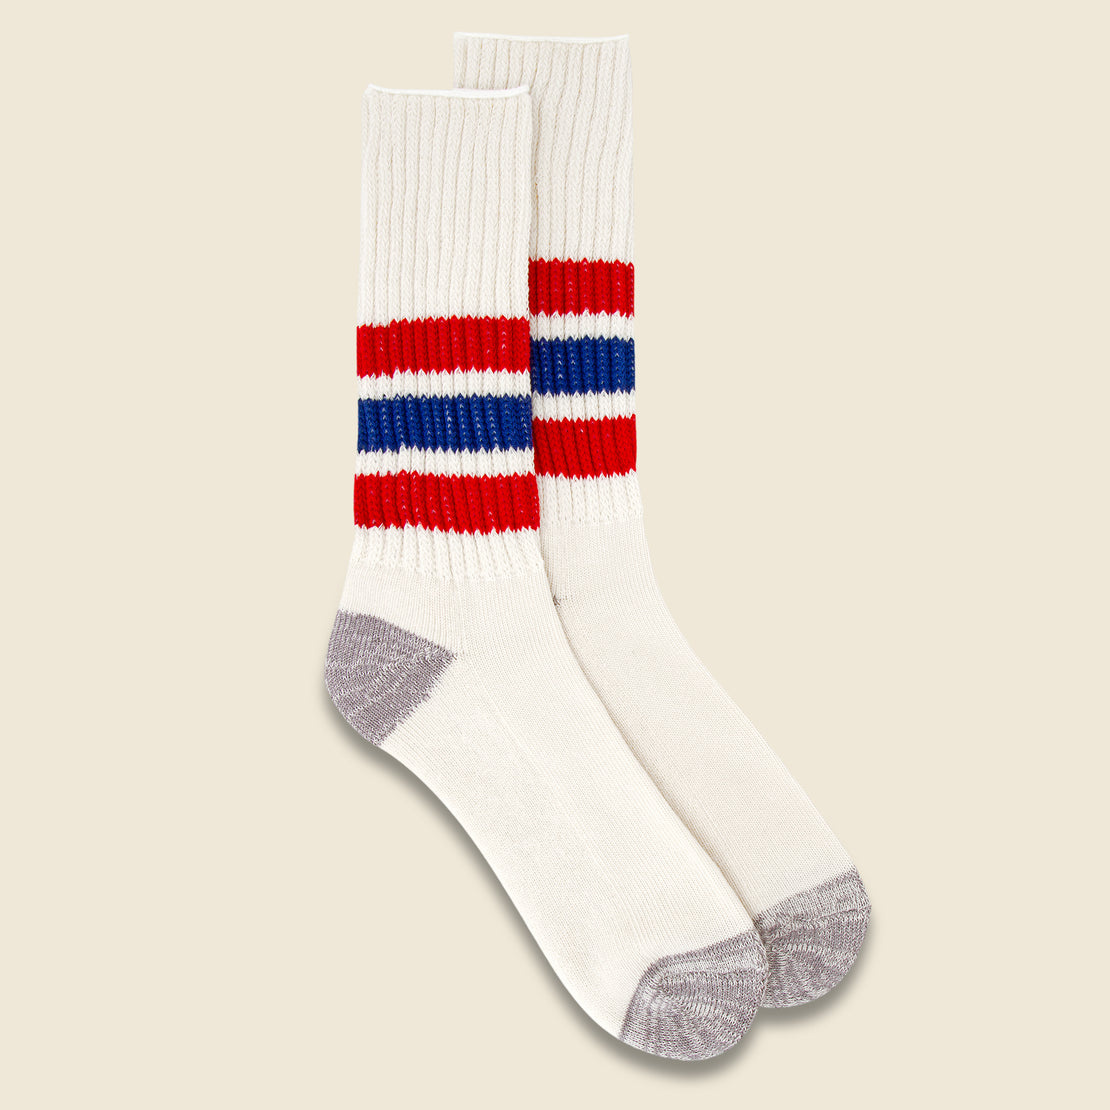 RoToTo Coarse Ribbed Old School Sock - Chili Red/Blue